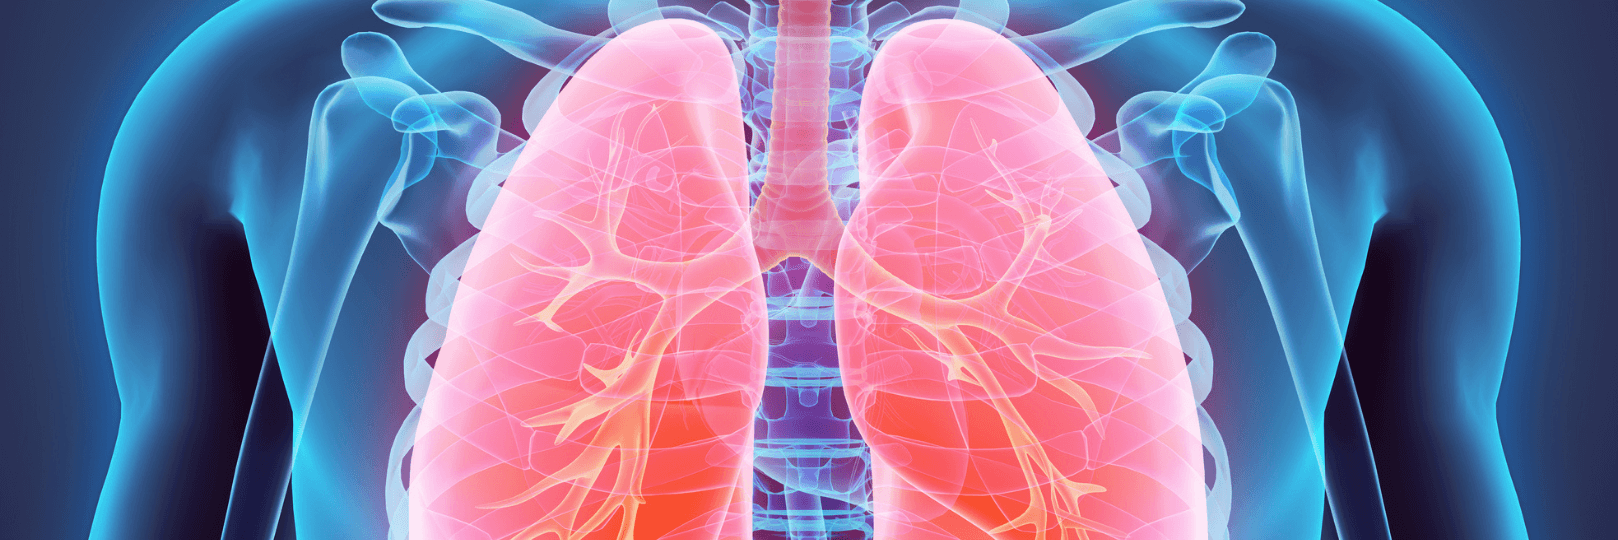 3D illustration of Lungs (Respiratory System)